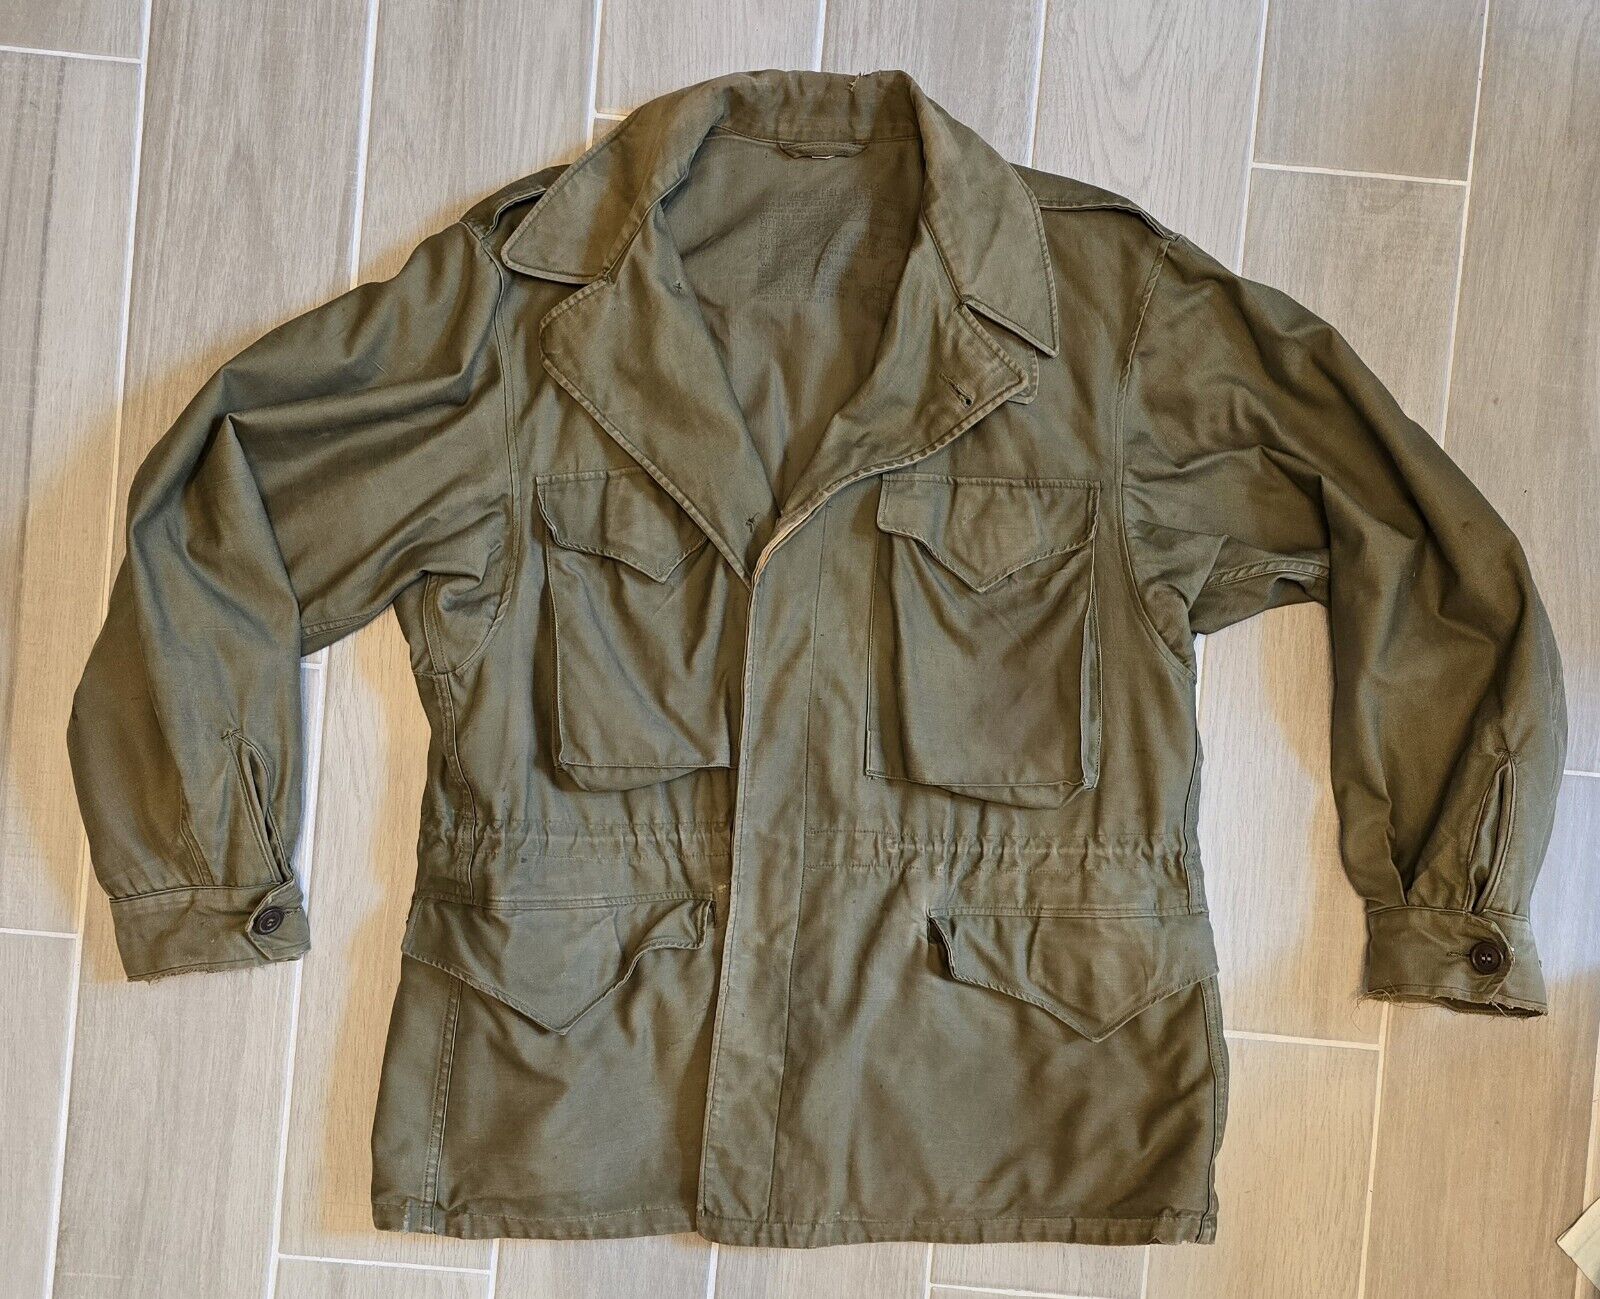 Vintage US Military Army M-1943 Field Jacket Size 40 Short WWII Era M-43